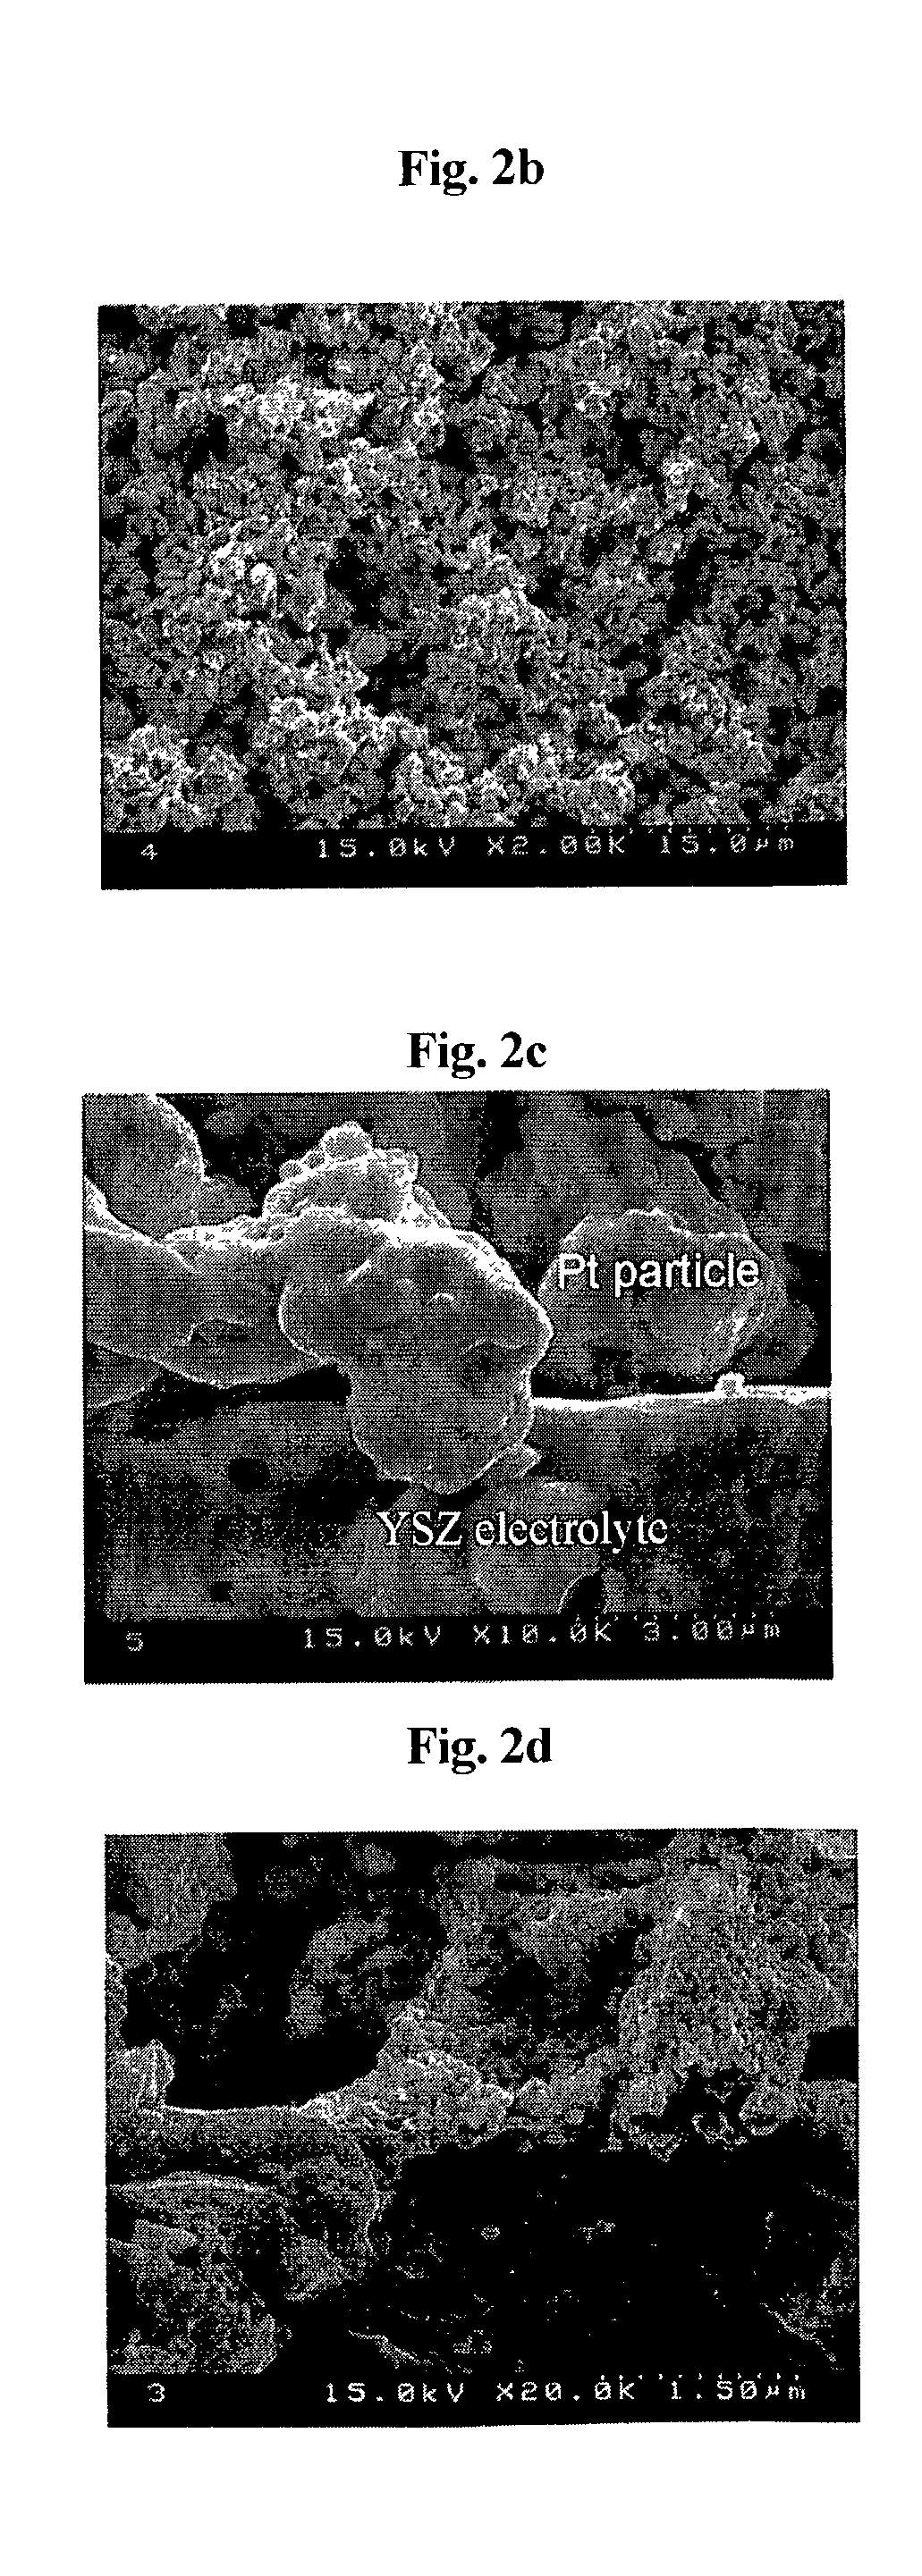 Electrode having microstructure of extended triple phase boundary by porous ion conductive ceria film coating and method to manufacture the said electrode